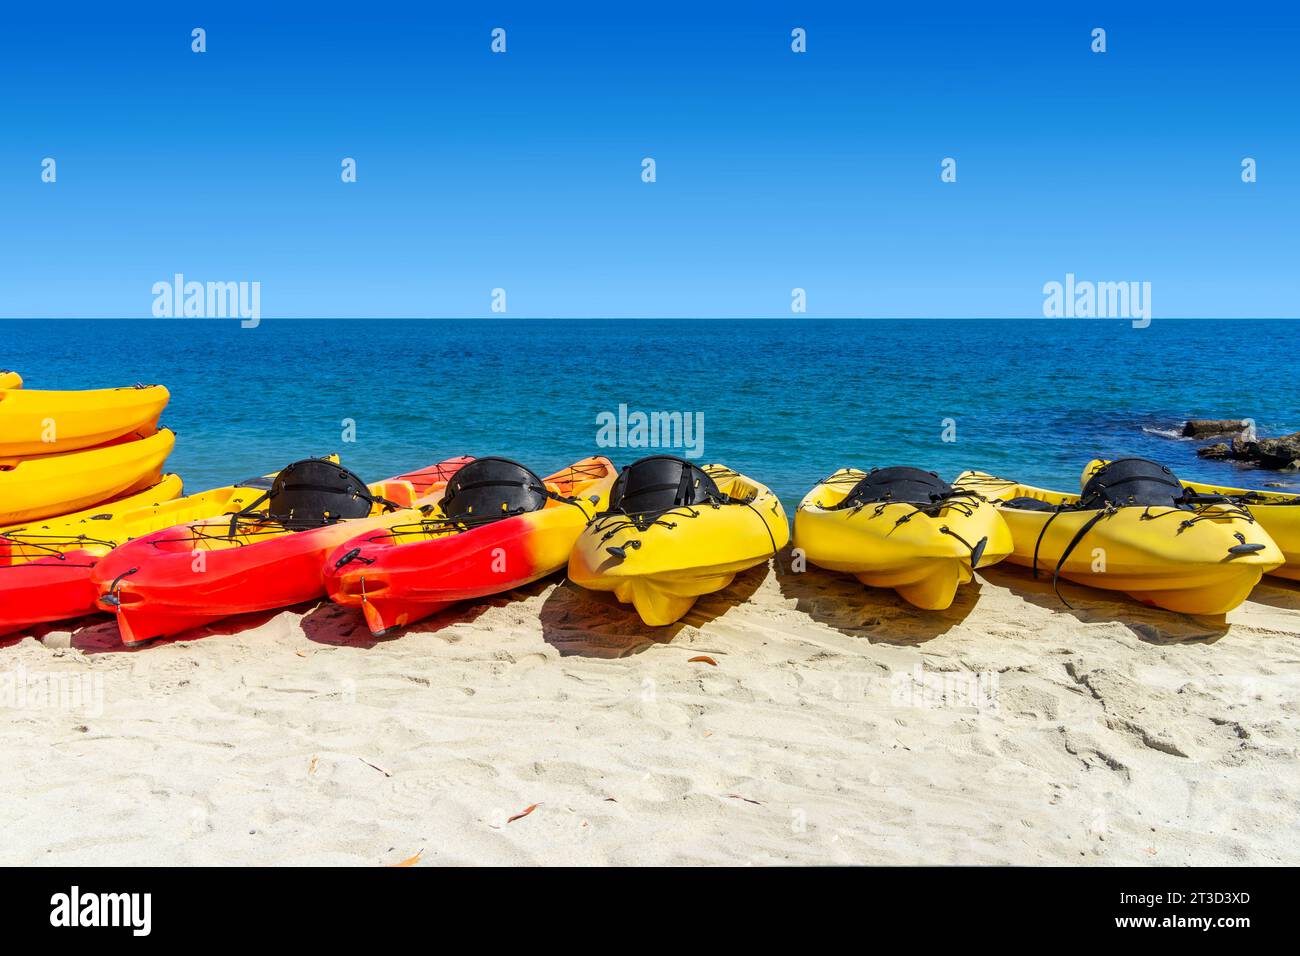 Red and yellow kayaks on the beach with the ocean and sky in the background Stock Photo